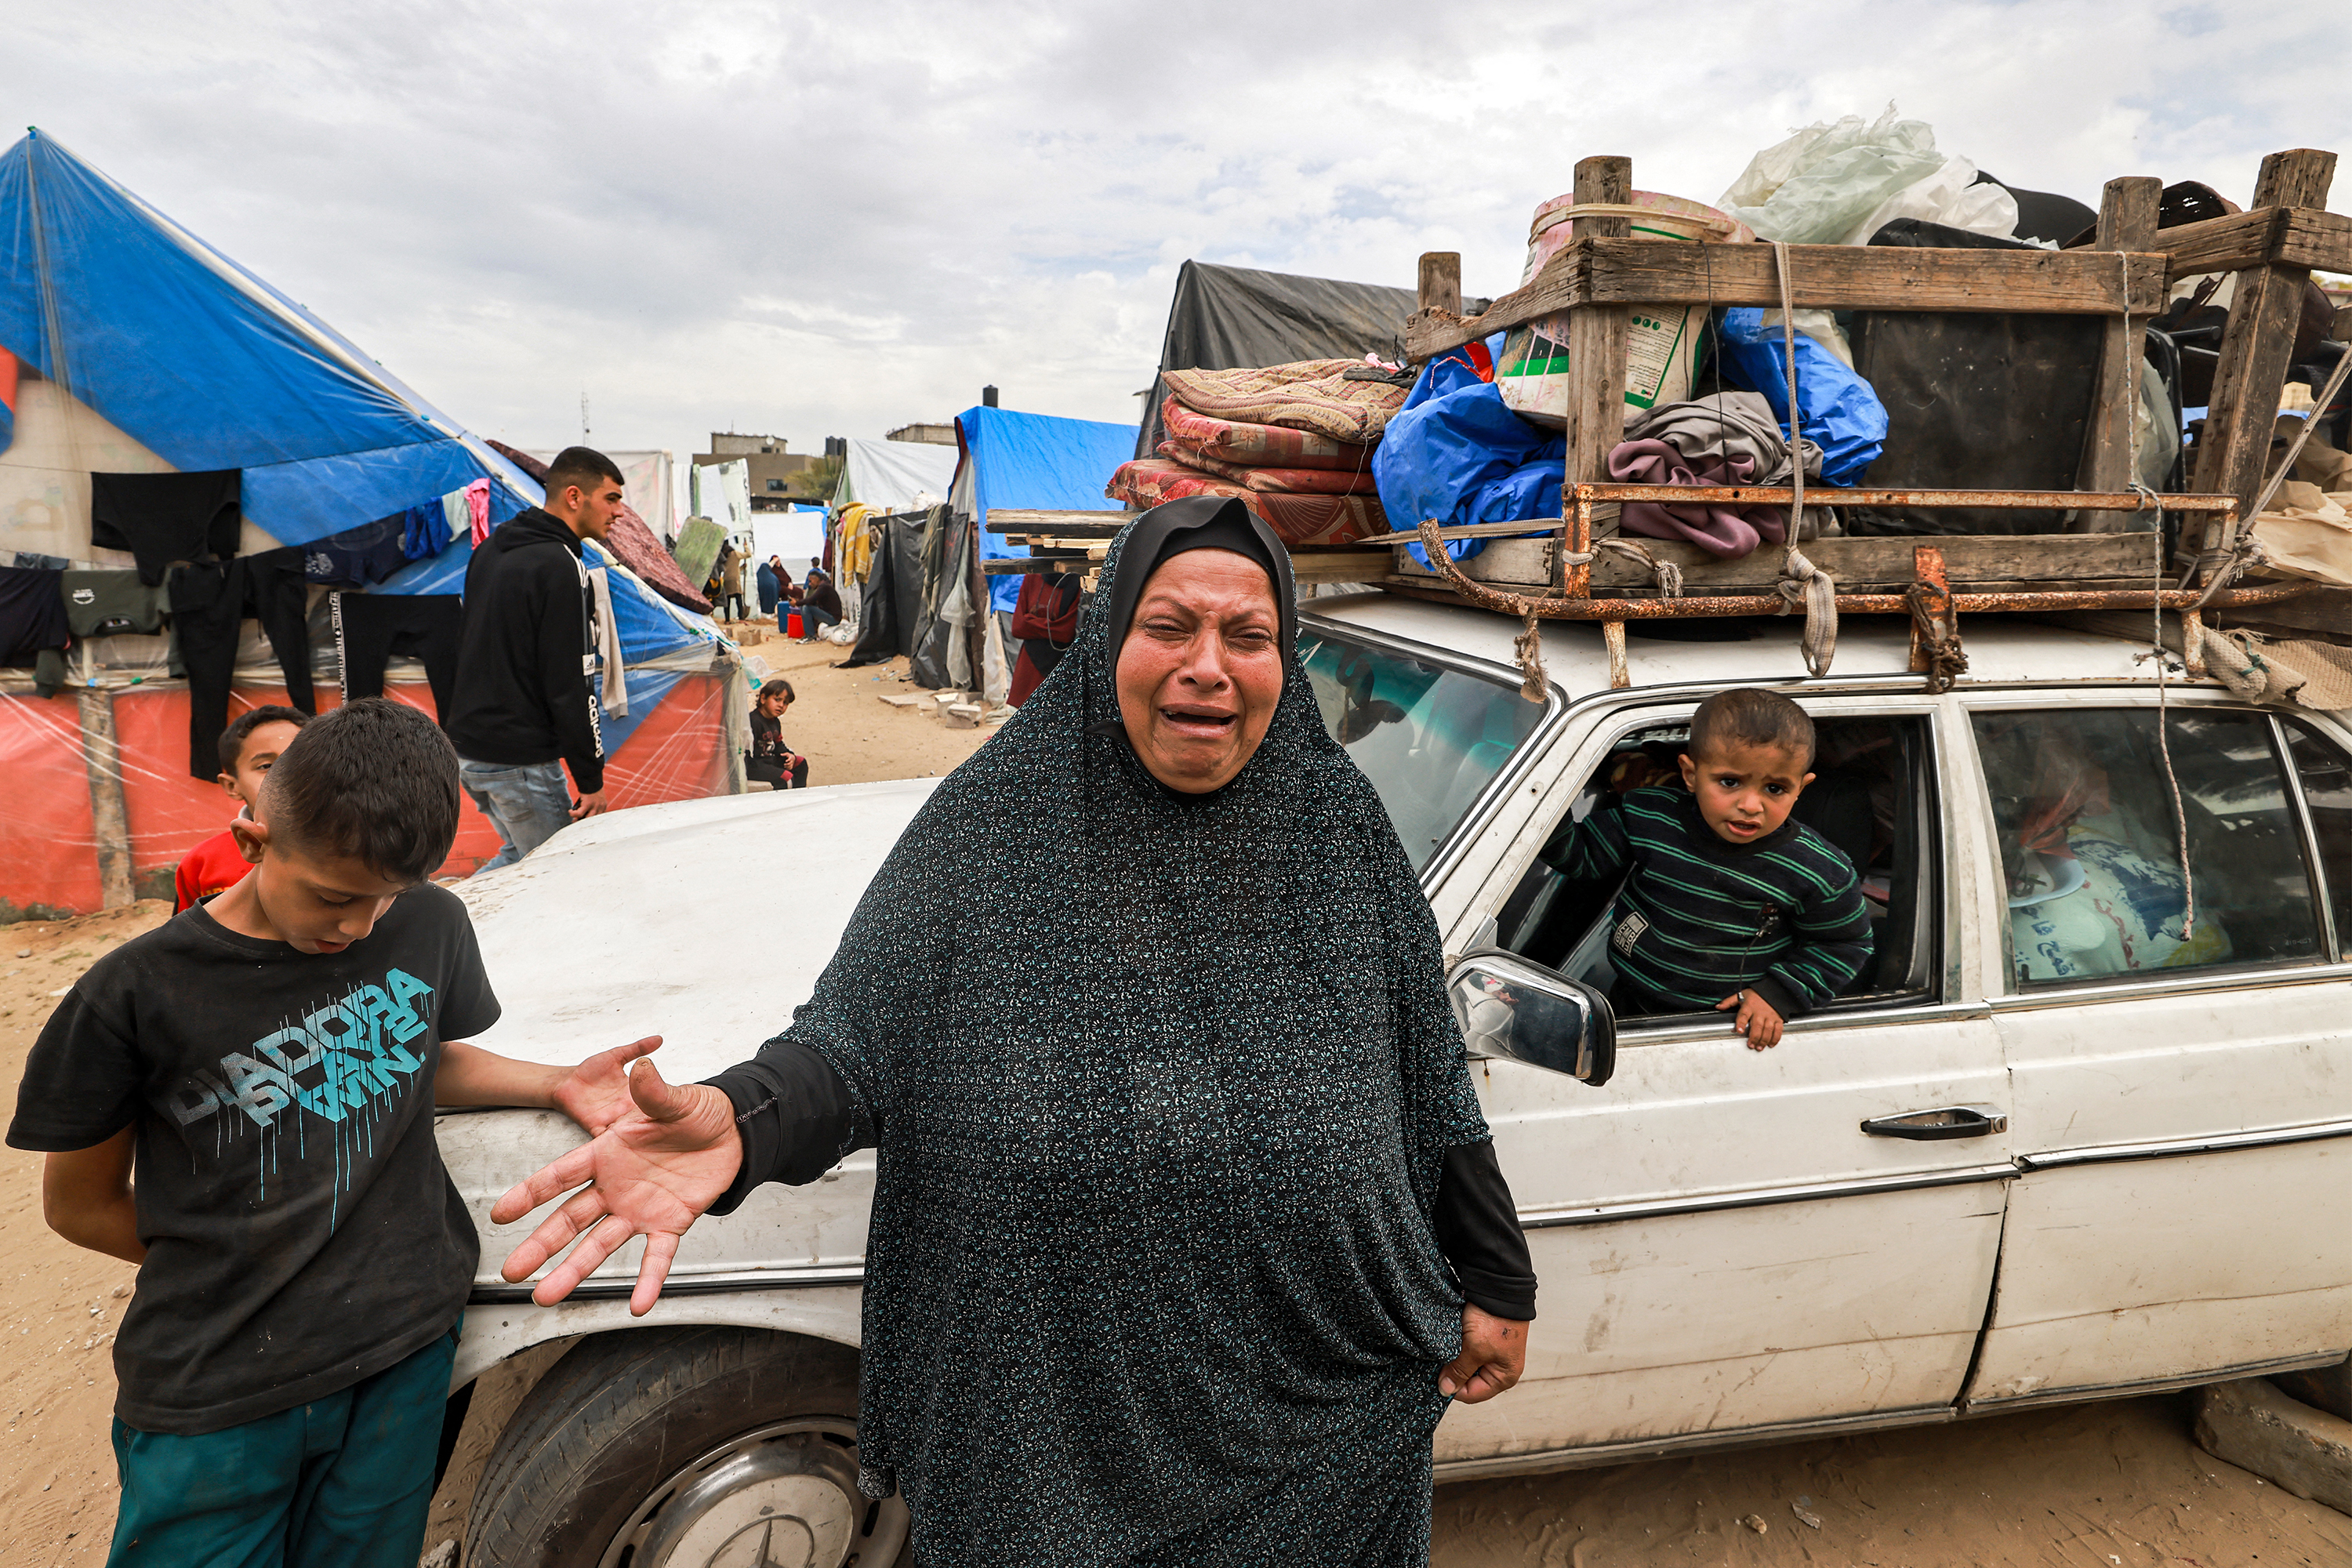 A woman reacts as she stands before a vehicle loaded with items secured by rope as people flee from Rafah, Gaza on February 13.